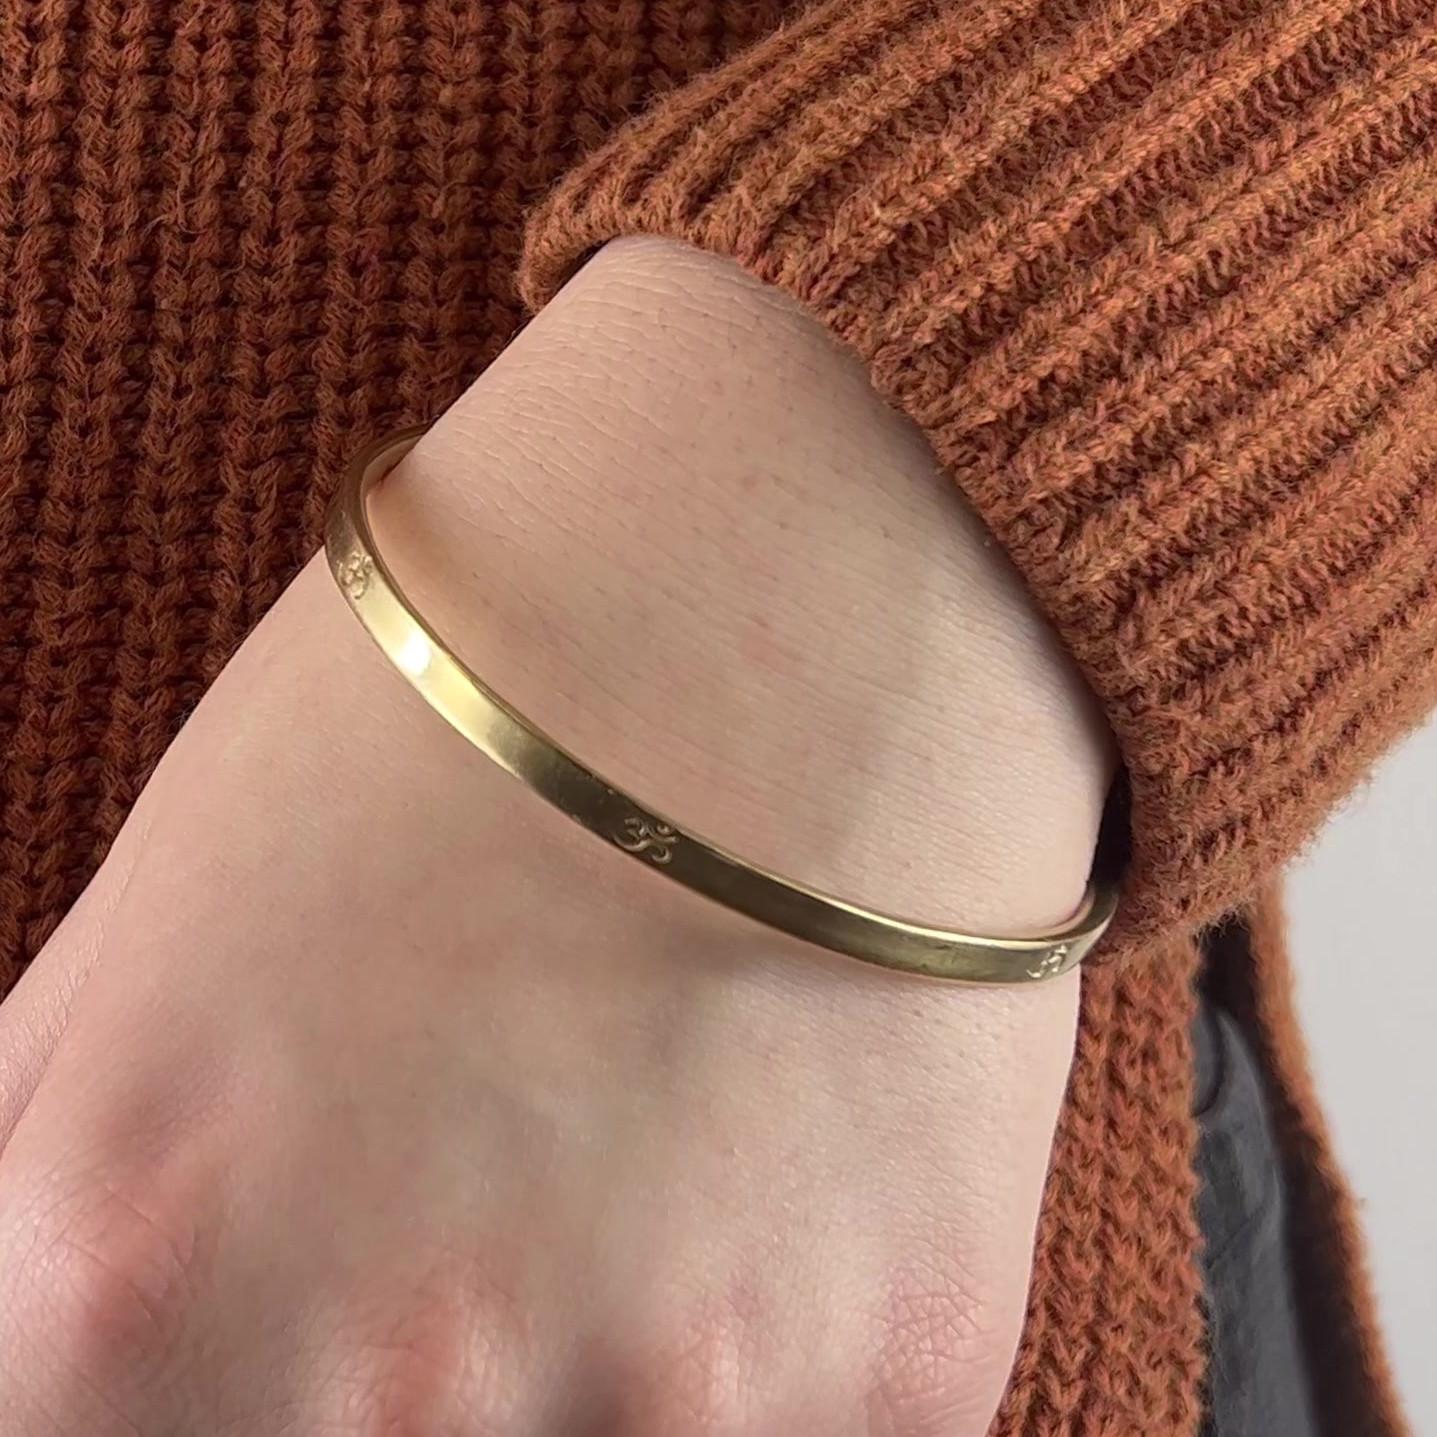 One Me & Ro Yellow Gold OM Bangle Bracelet. Crafted in 10 karat yellow gold, signed Me & Ro. Circa 2010s. The bracelet measures 8 1/2 inches in length. 

About this Item: Add a touch of modern sophistication to your jewelry collection with this